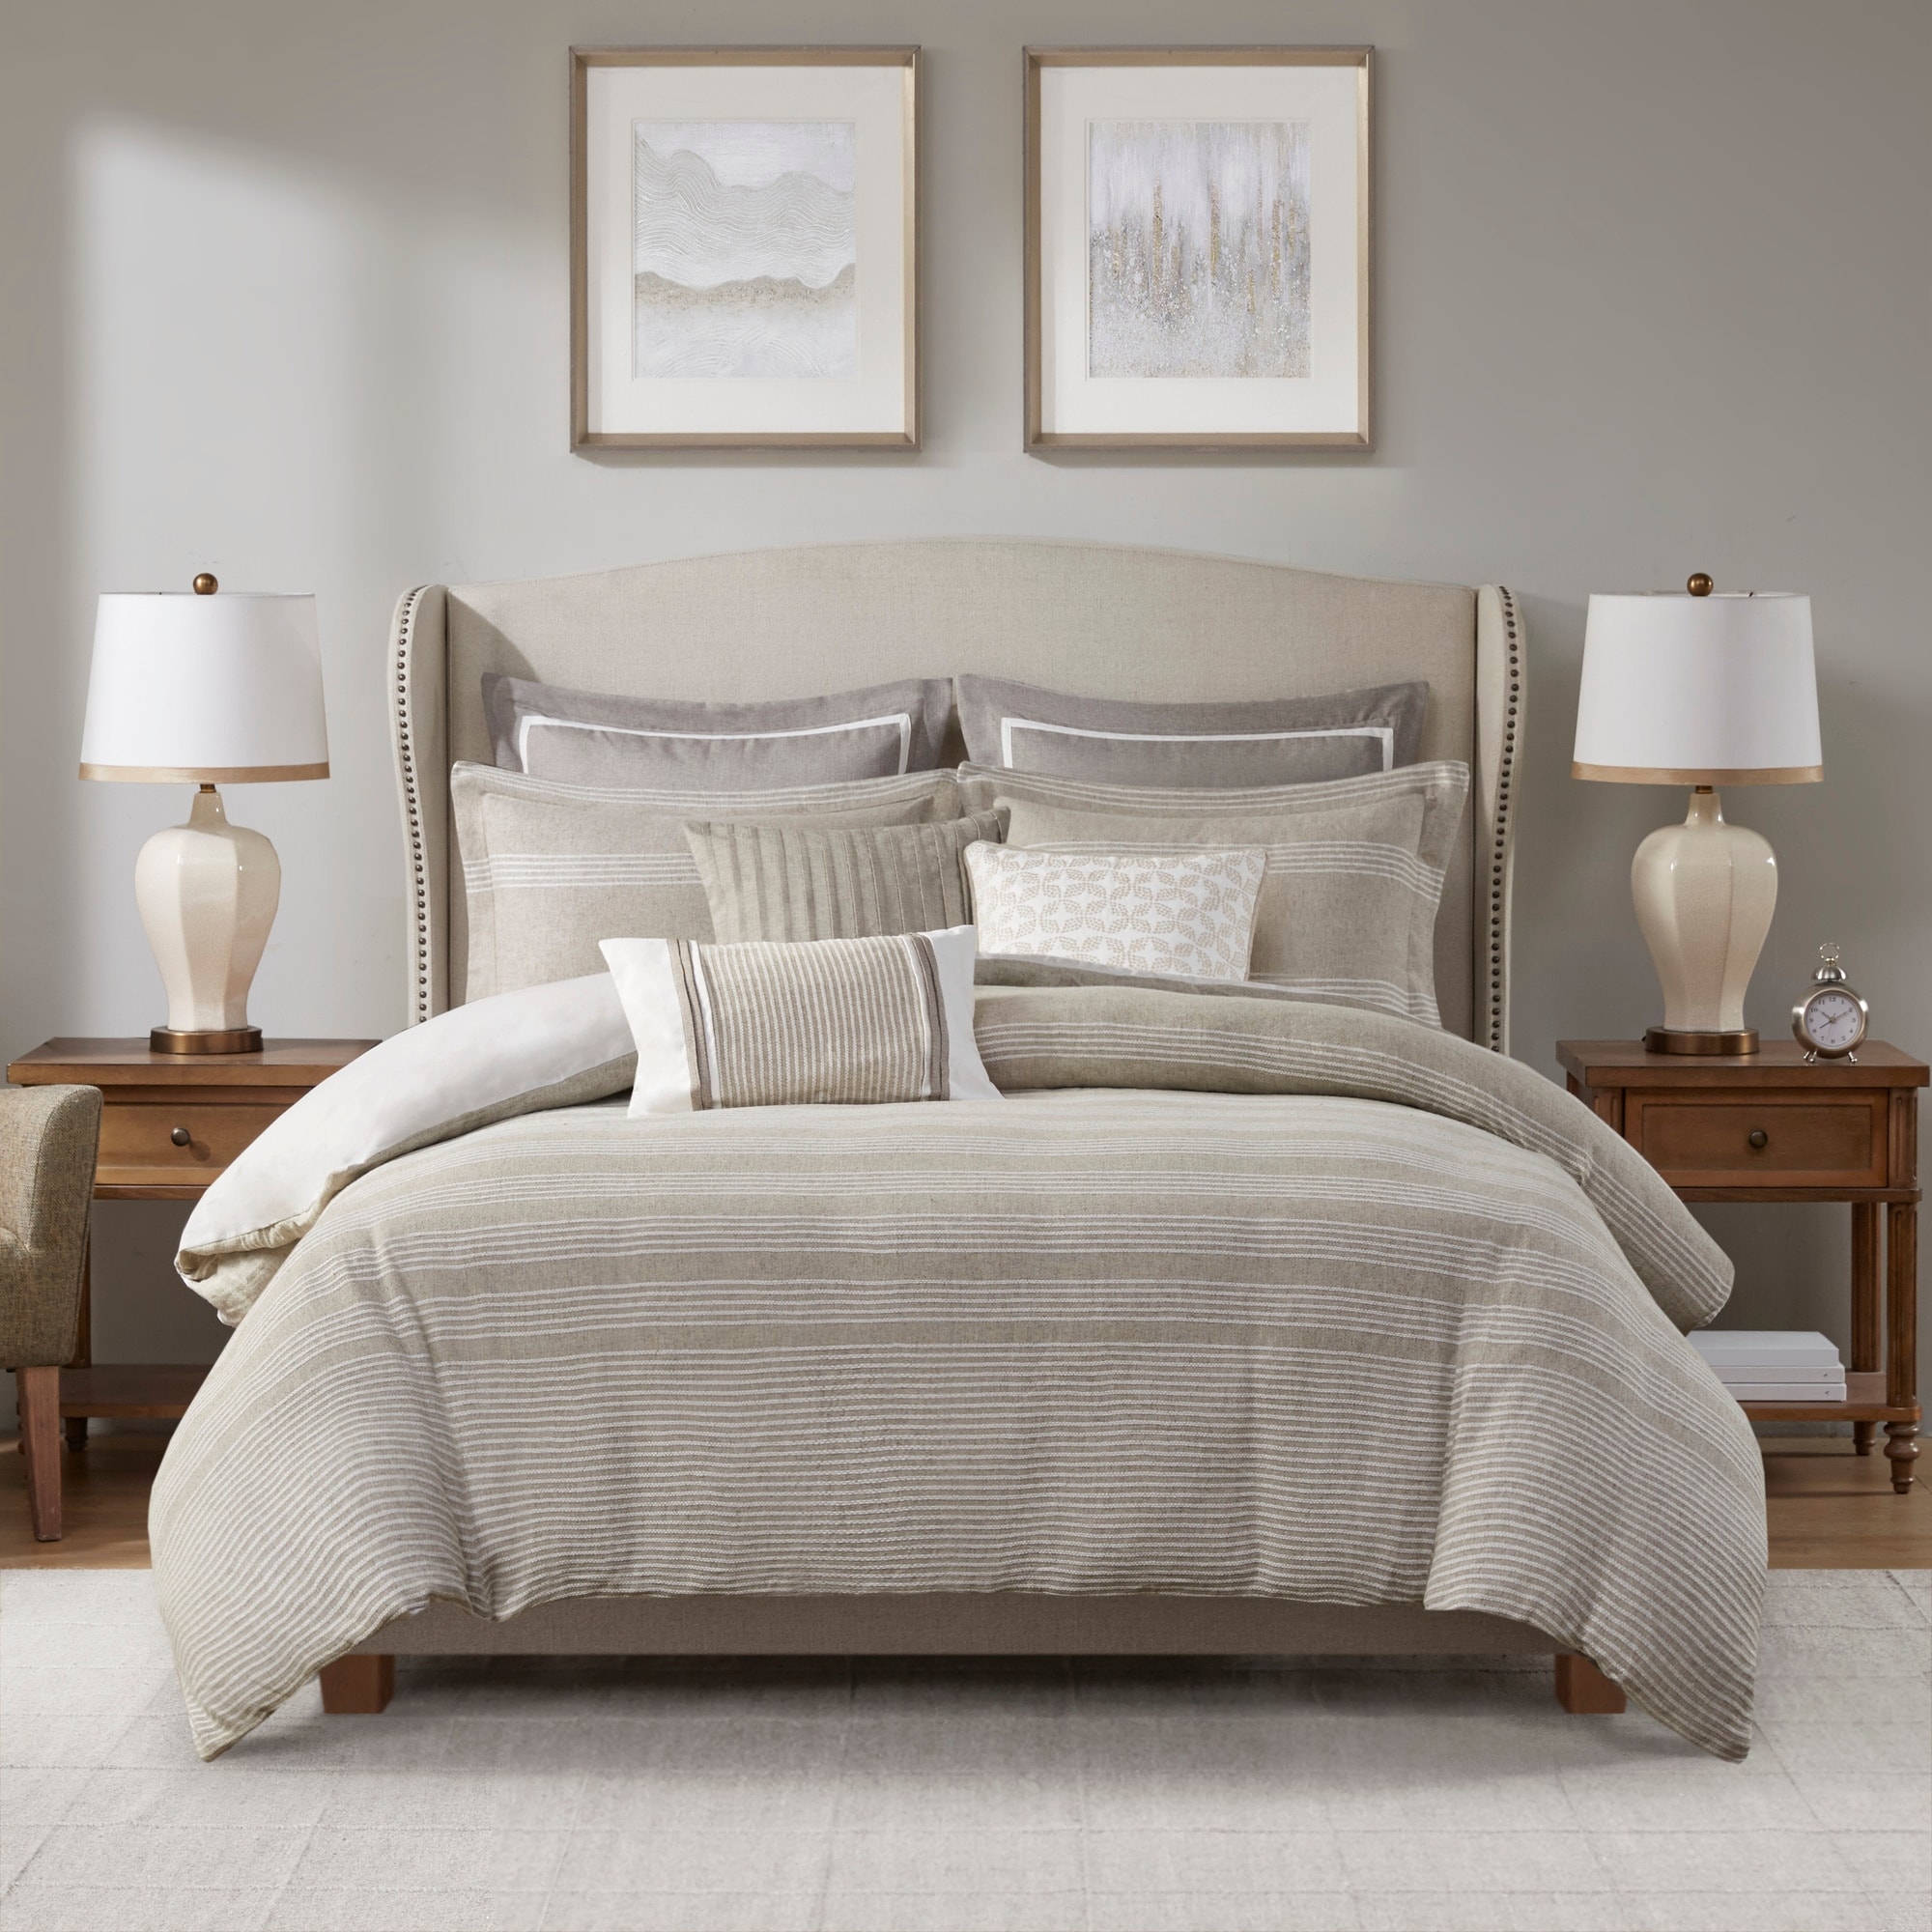 https://ak1.ostkcdn.com/images/products/is/images/direct/93ff144da78ed0c7431e2807f52feb033bffacc2/Madison-Park-Signature-Carmel-Oversized-Jacquard-Comforter-Set-with-Euro-Shams-and-Throw-Pillows.jpg